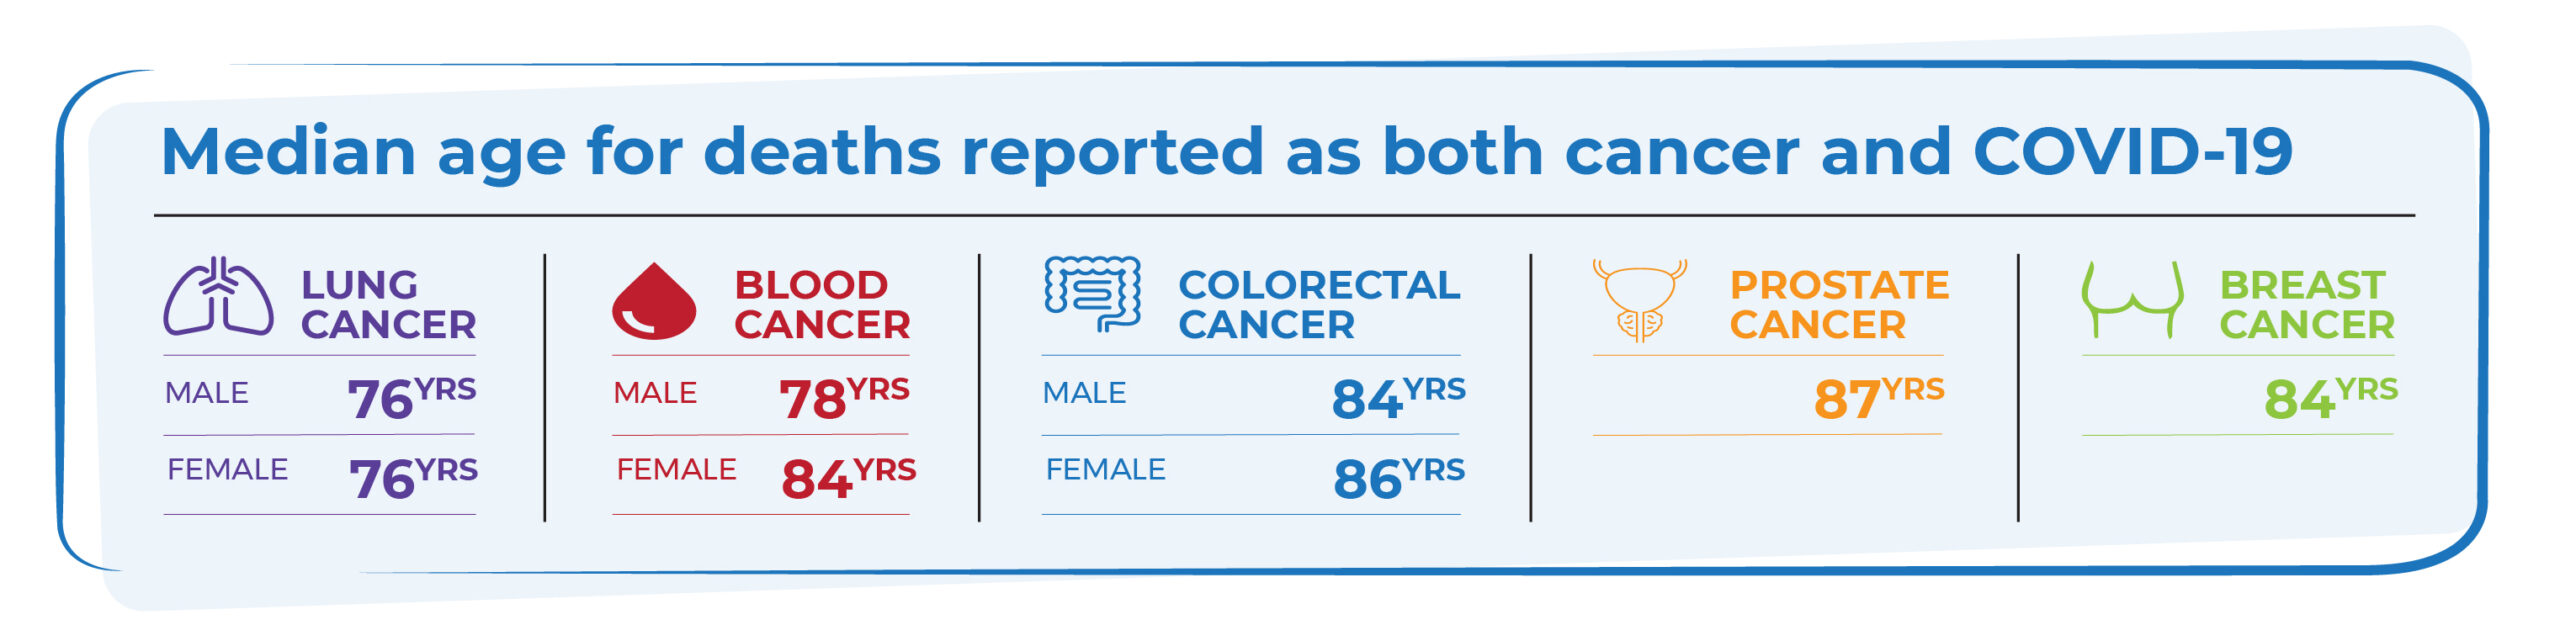 Median age for lung cancer age at death is 76 years. Blood is 78 for males, and 84 for females. Colorectal is 84 for males, 86 for females. Prostate is 87 years. Breast is 84 years.